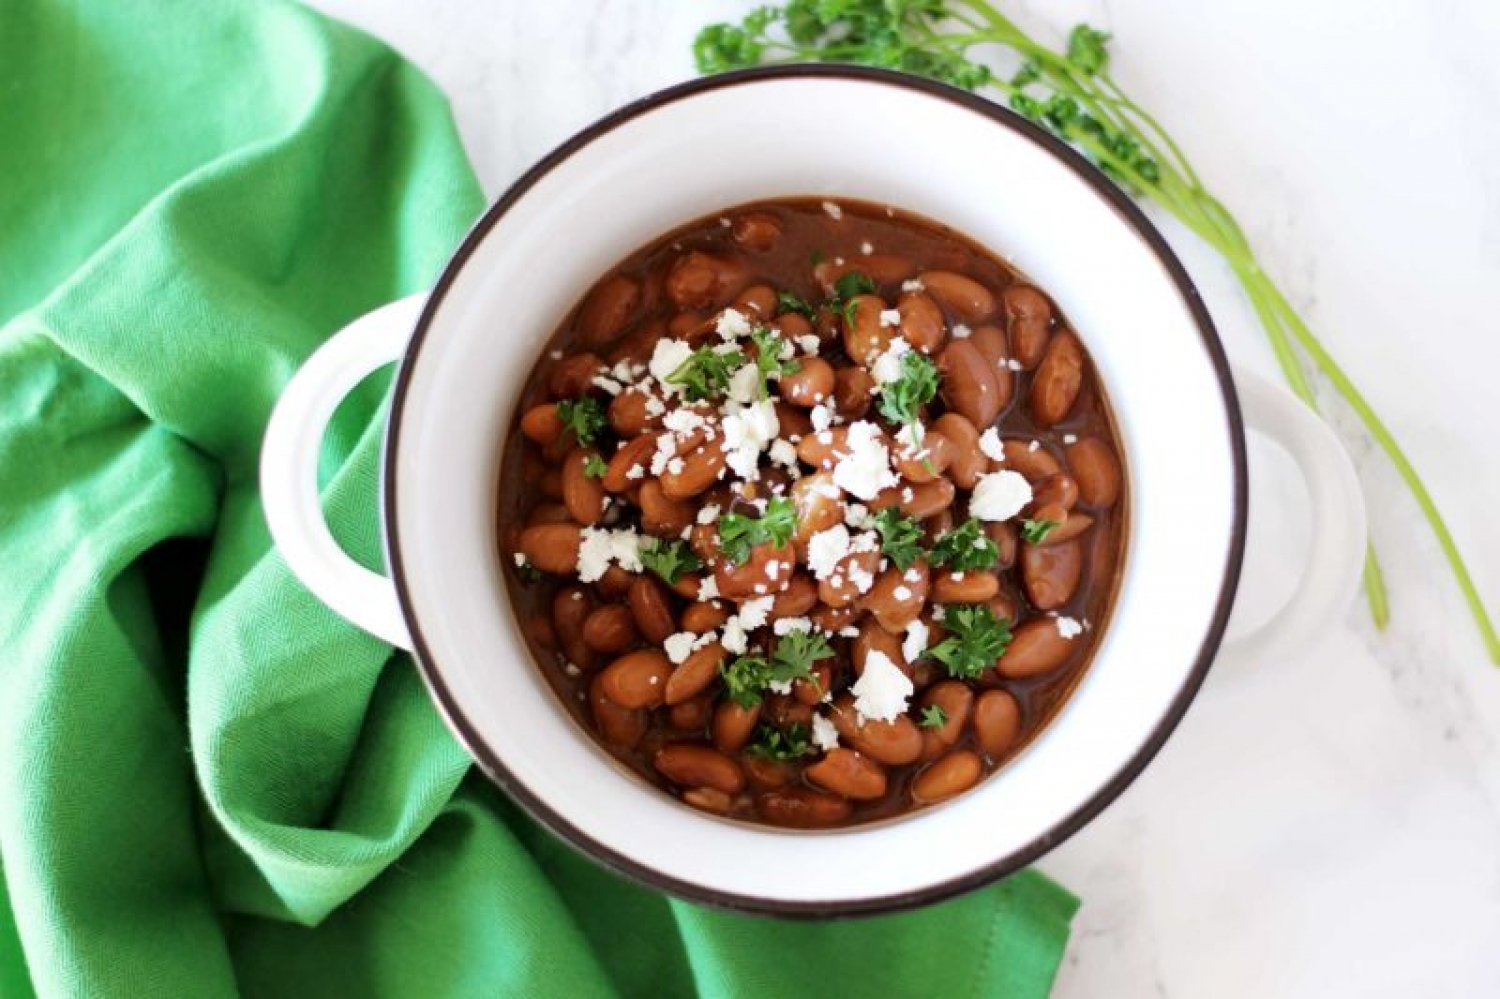 <p>When you want to make pinto beans from scratch, turn to <a href="https://recipesworthrepeating.com/slow-cooker-pinto-beans/" rel="noopener">this super easy slow cooker recipe</a> that only requires 4 extra ingredients. Get it going in the morning before you head out the door, and come home to perfectly cooked beans ready to serve with any dish.</p>